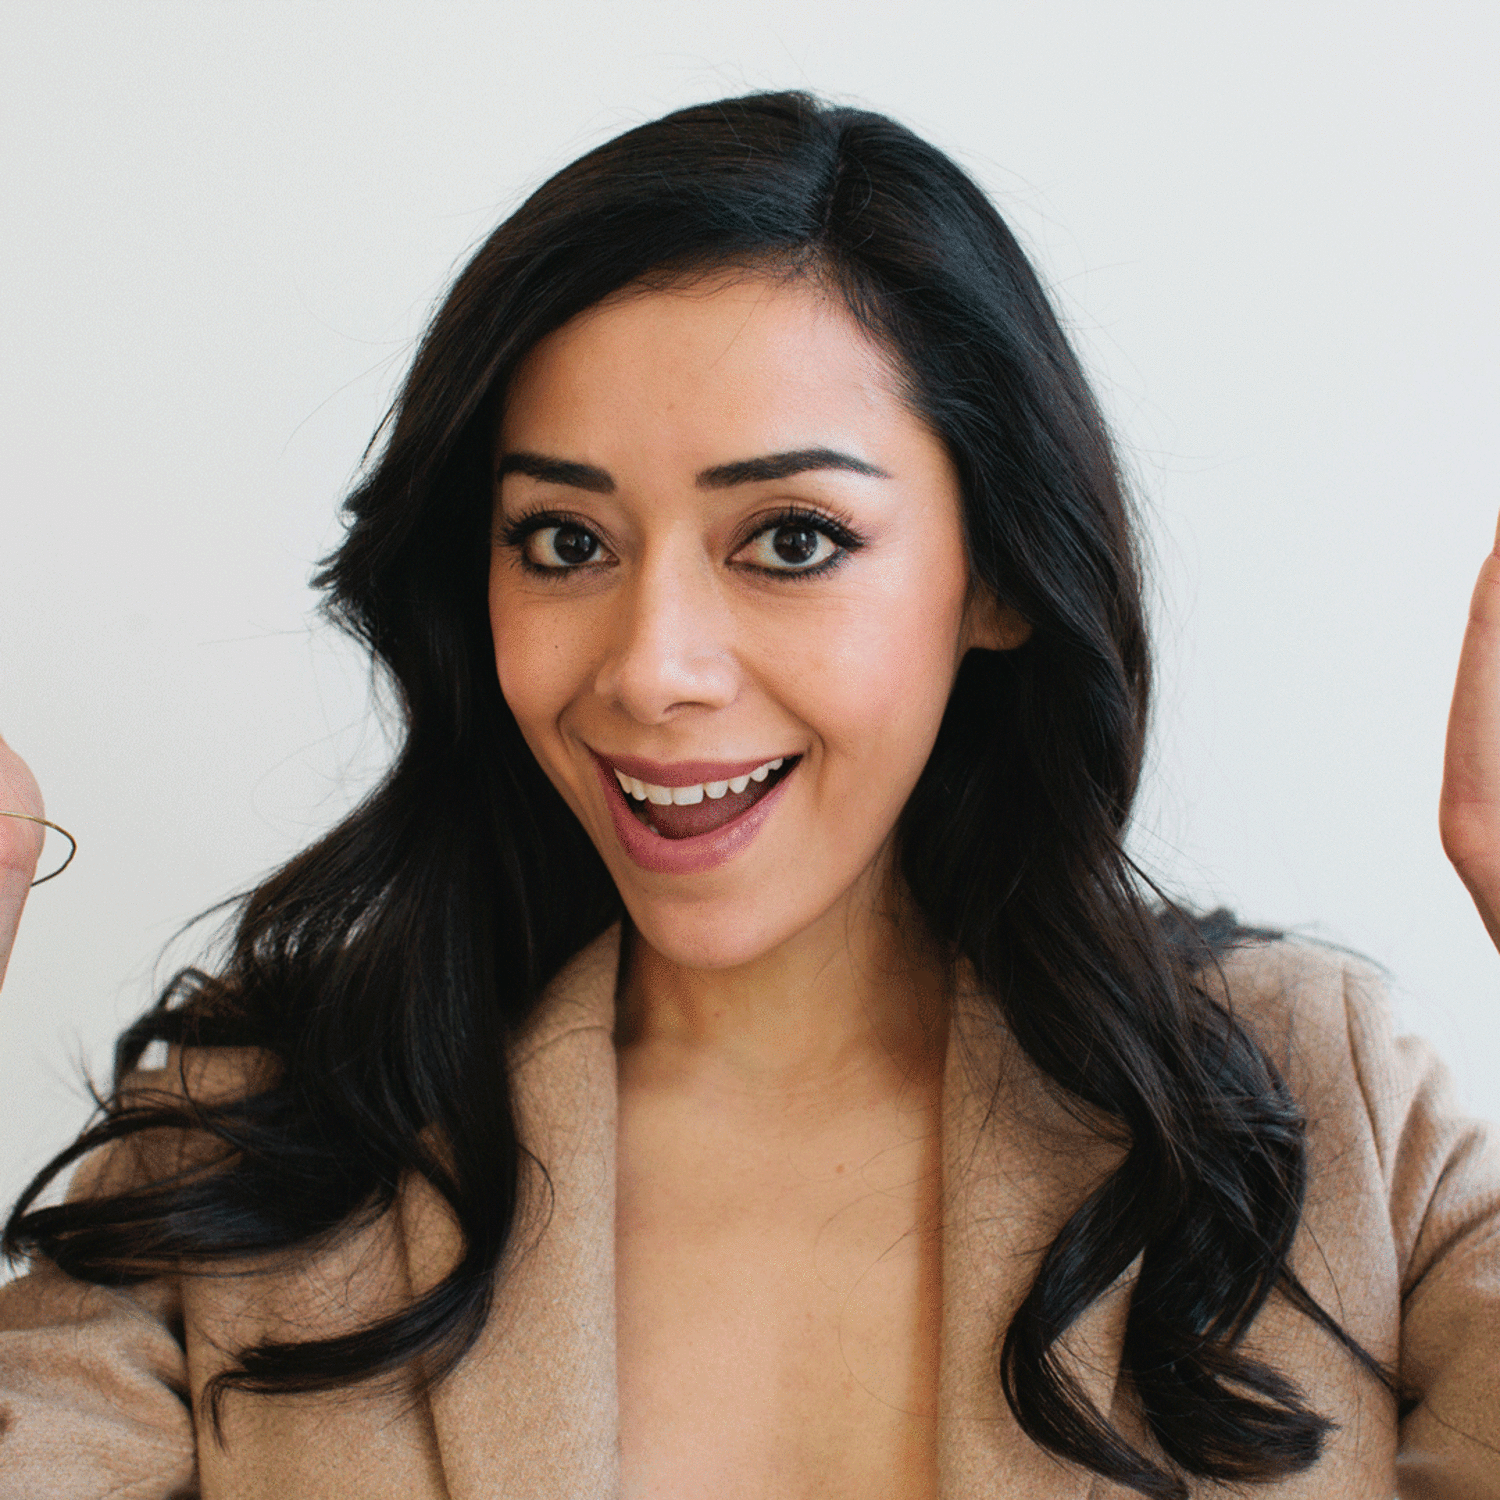 claire tulabing recommends aimee garcia sexy pics pic